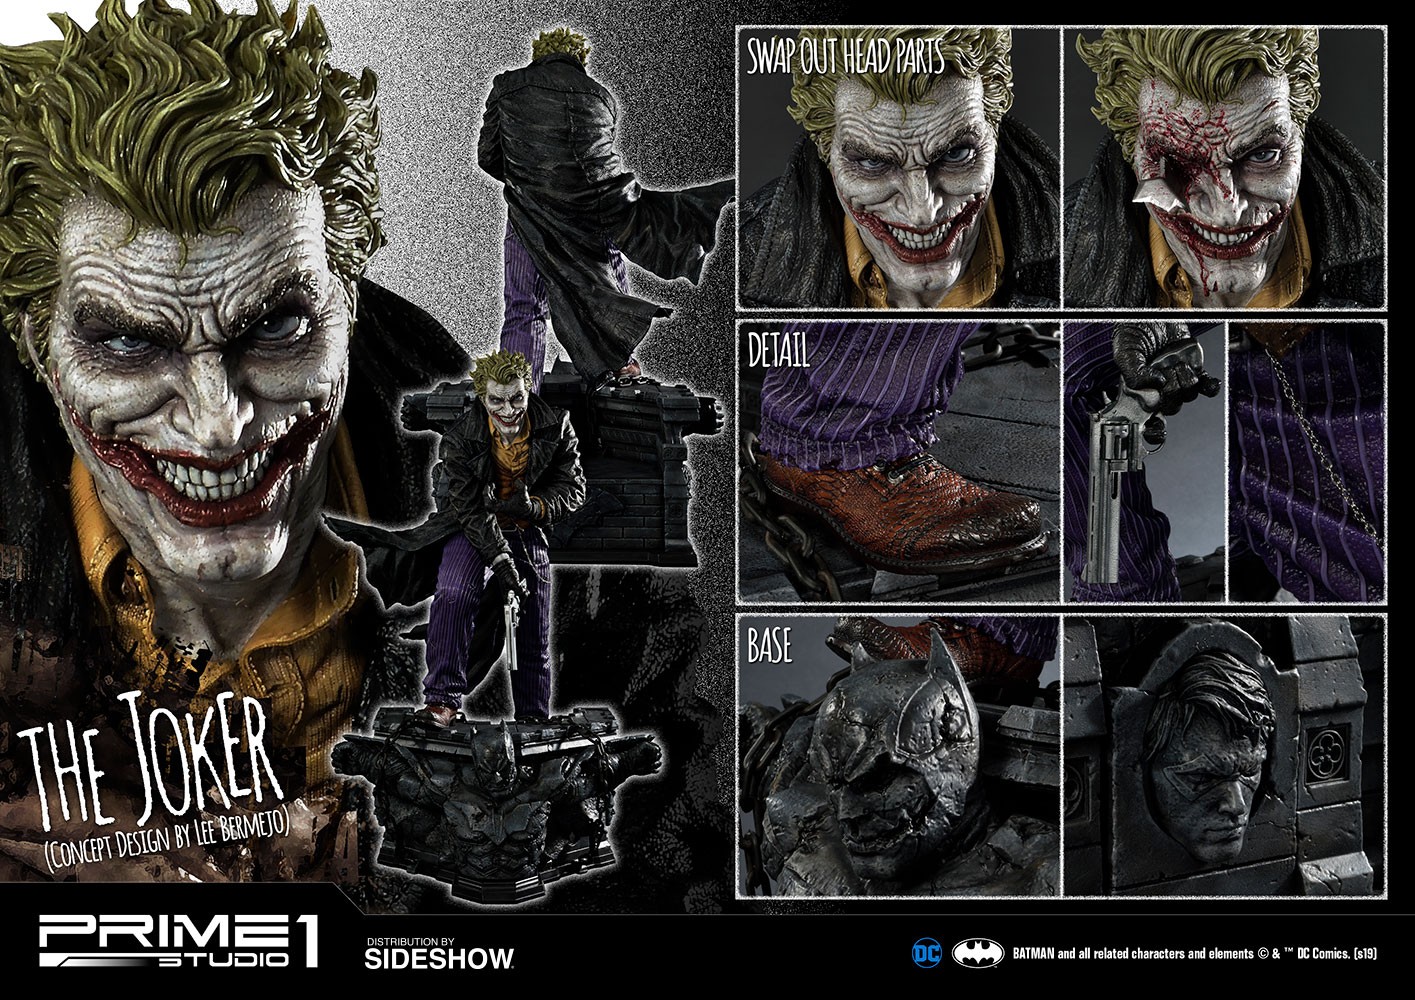 The Joker (Concept Design by Lee Bermejo) Collector Edition (Prototype Shown) View 2